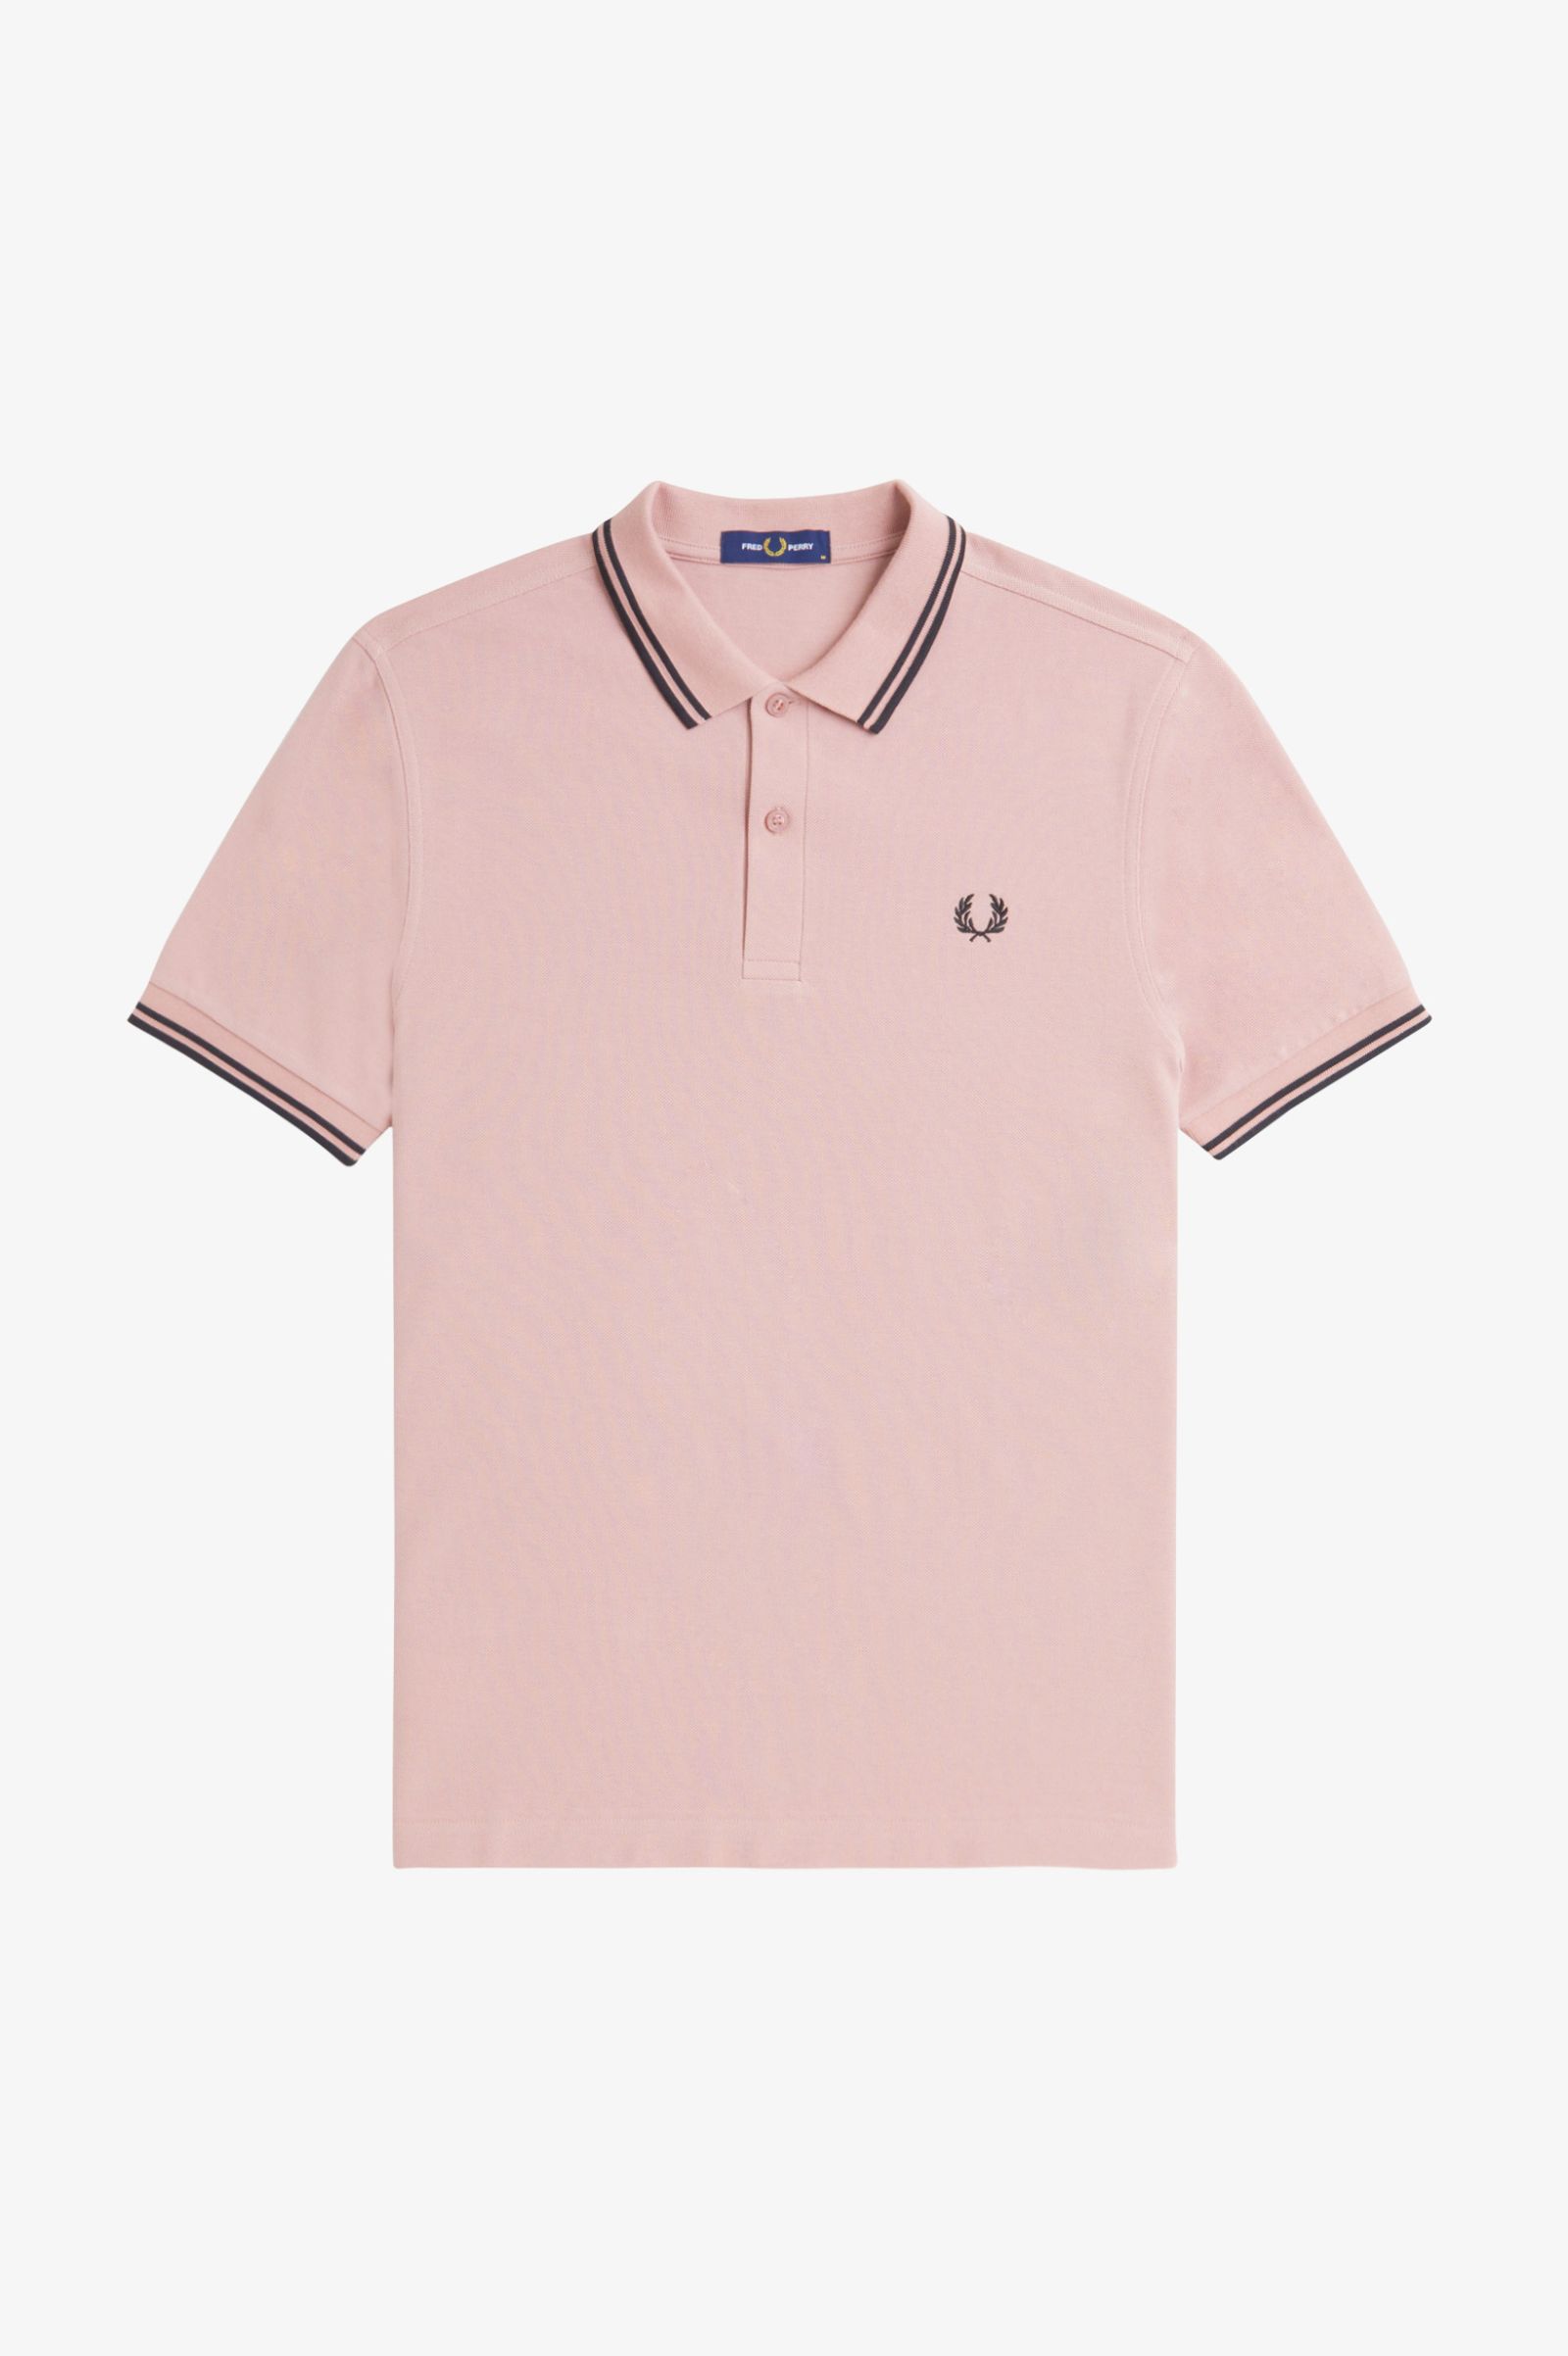 Fred Perry Twin Tipped Shirt M3600 in Dusty Rose Pink / Black 